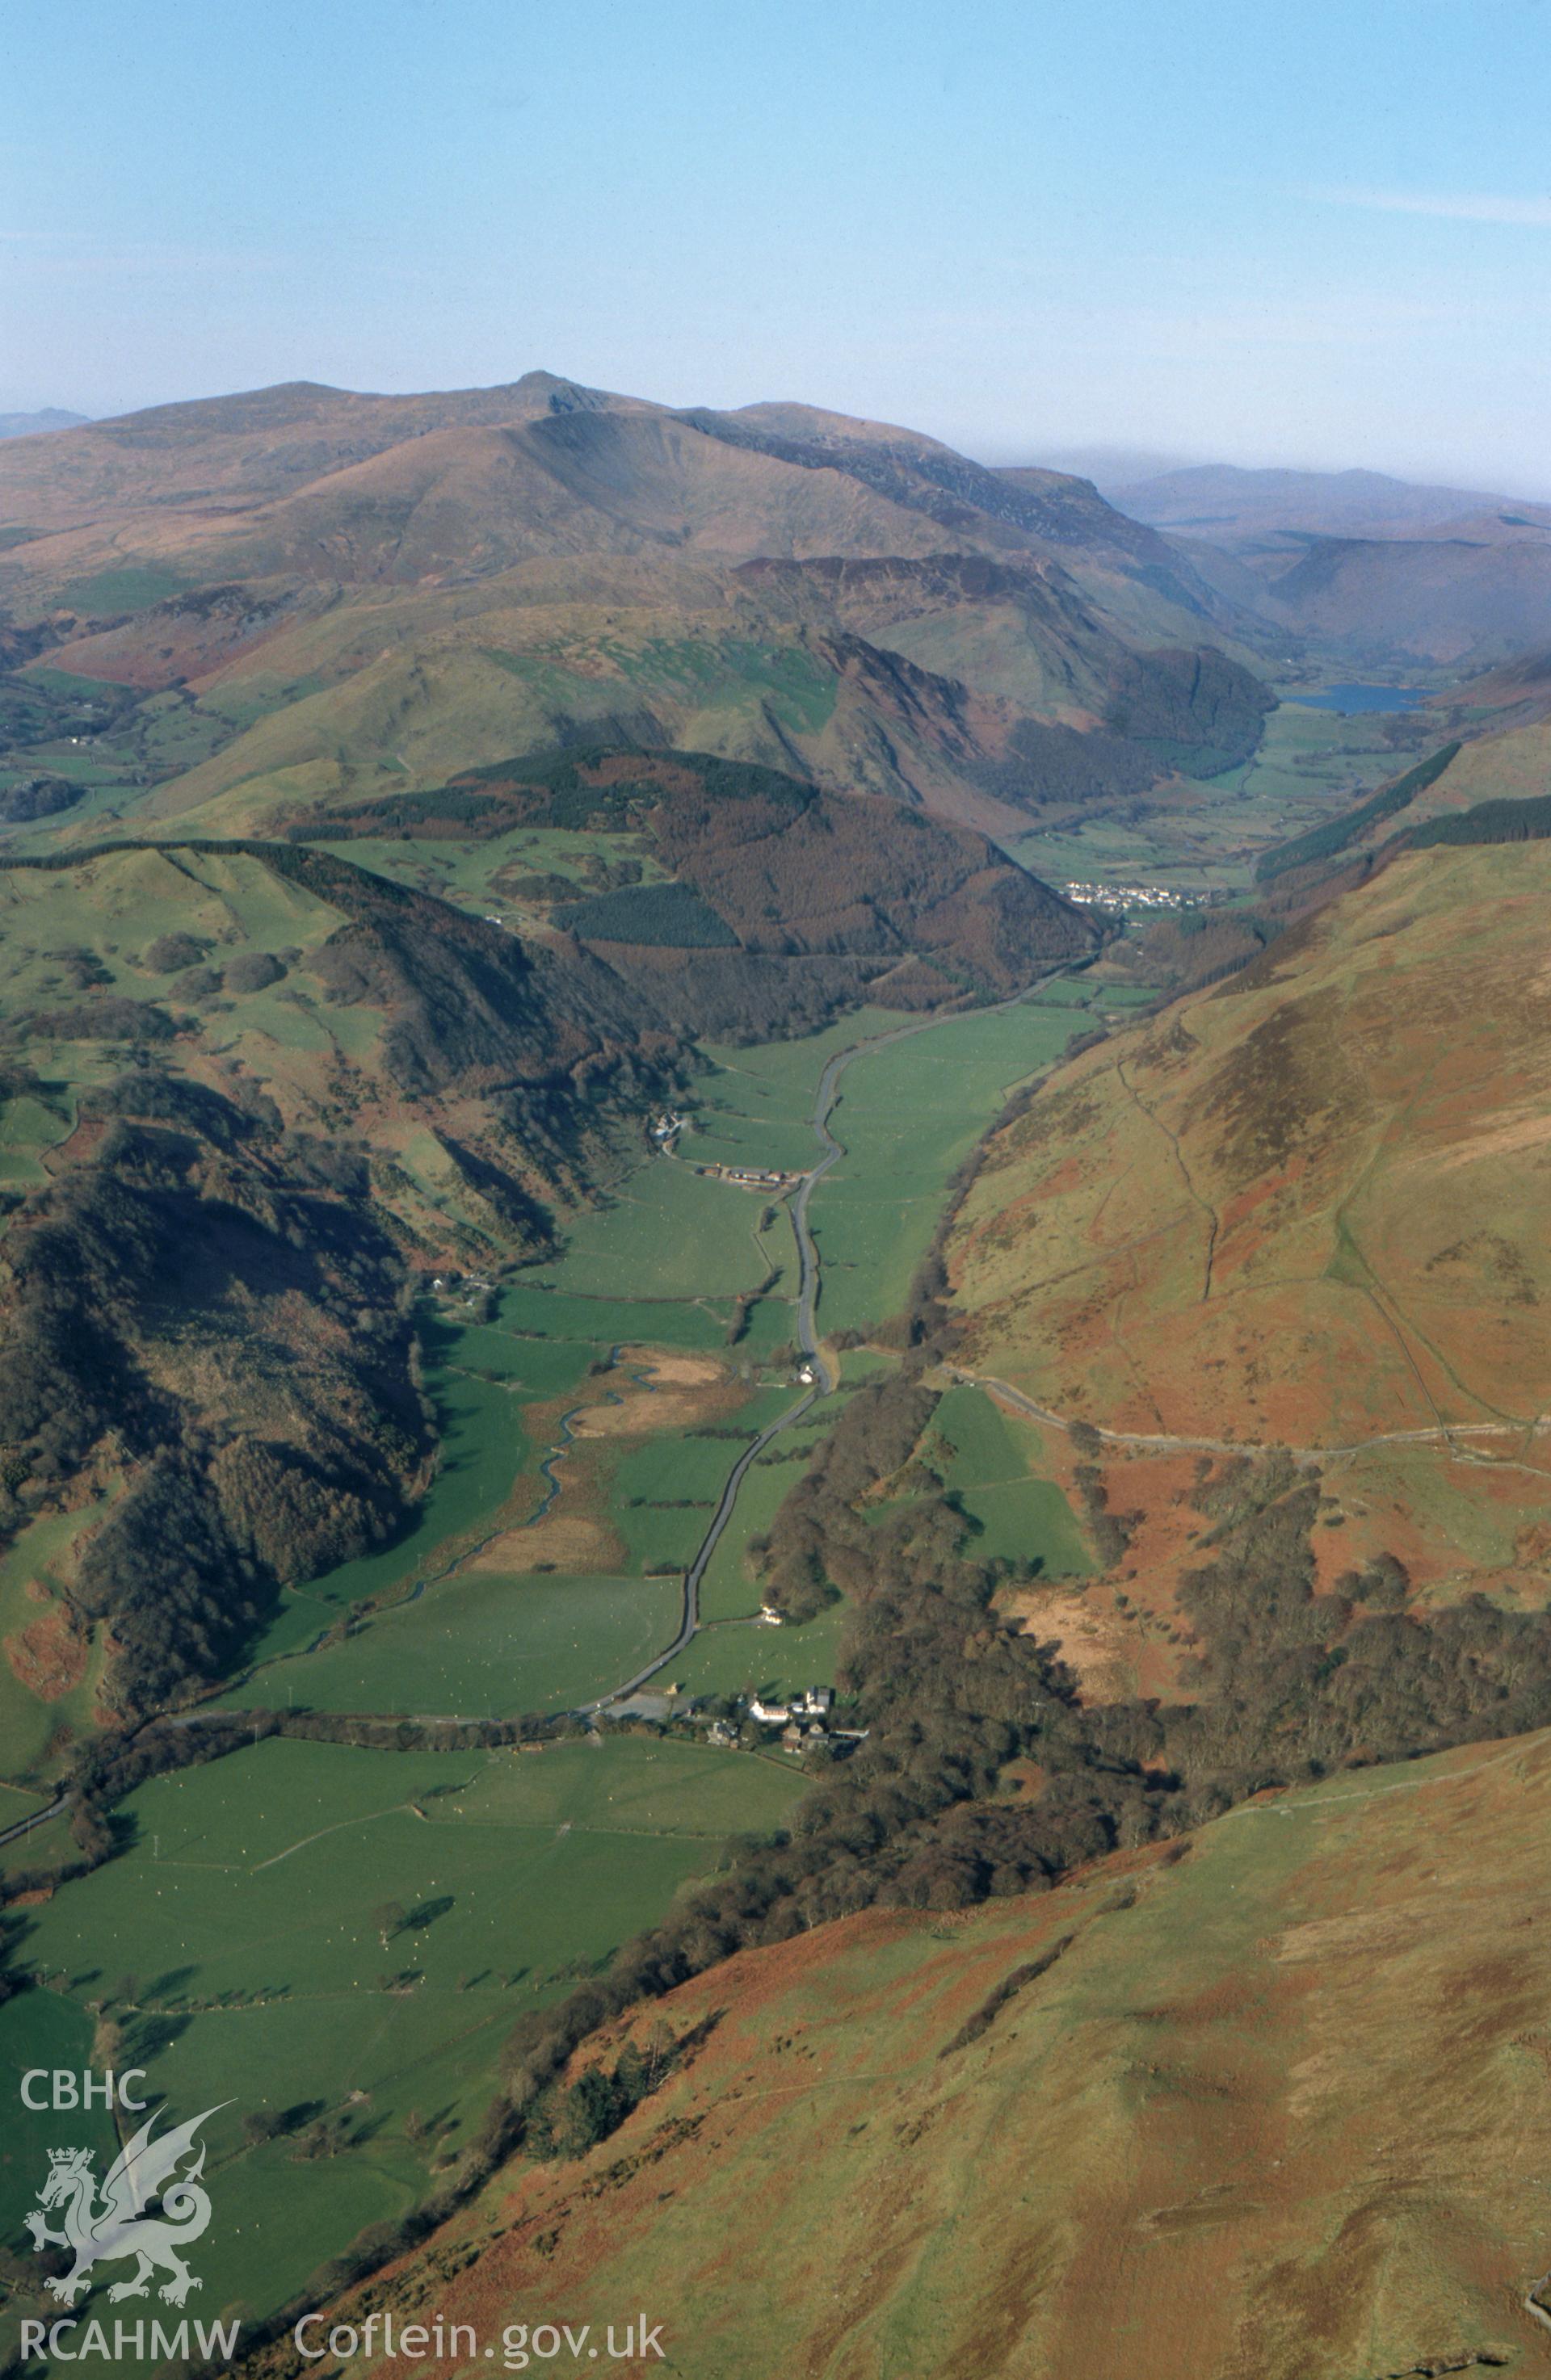 RCAHMW colour slide oblique aerial photograph of the Dolgoch landscape north-east to Tal-y-llyn, taken on 17/03/1999 by Toby Driver